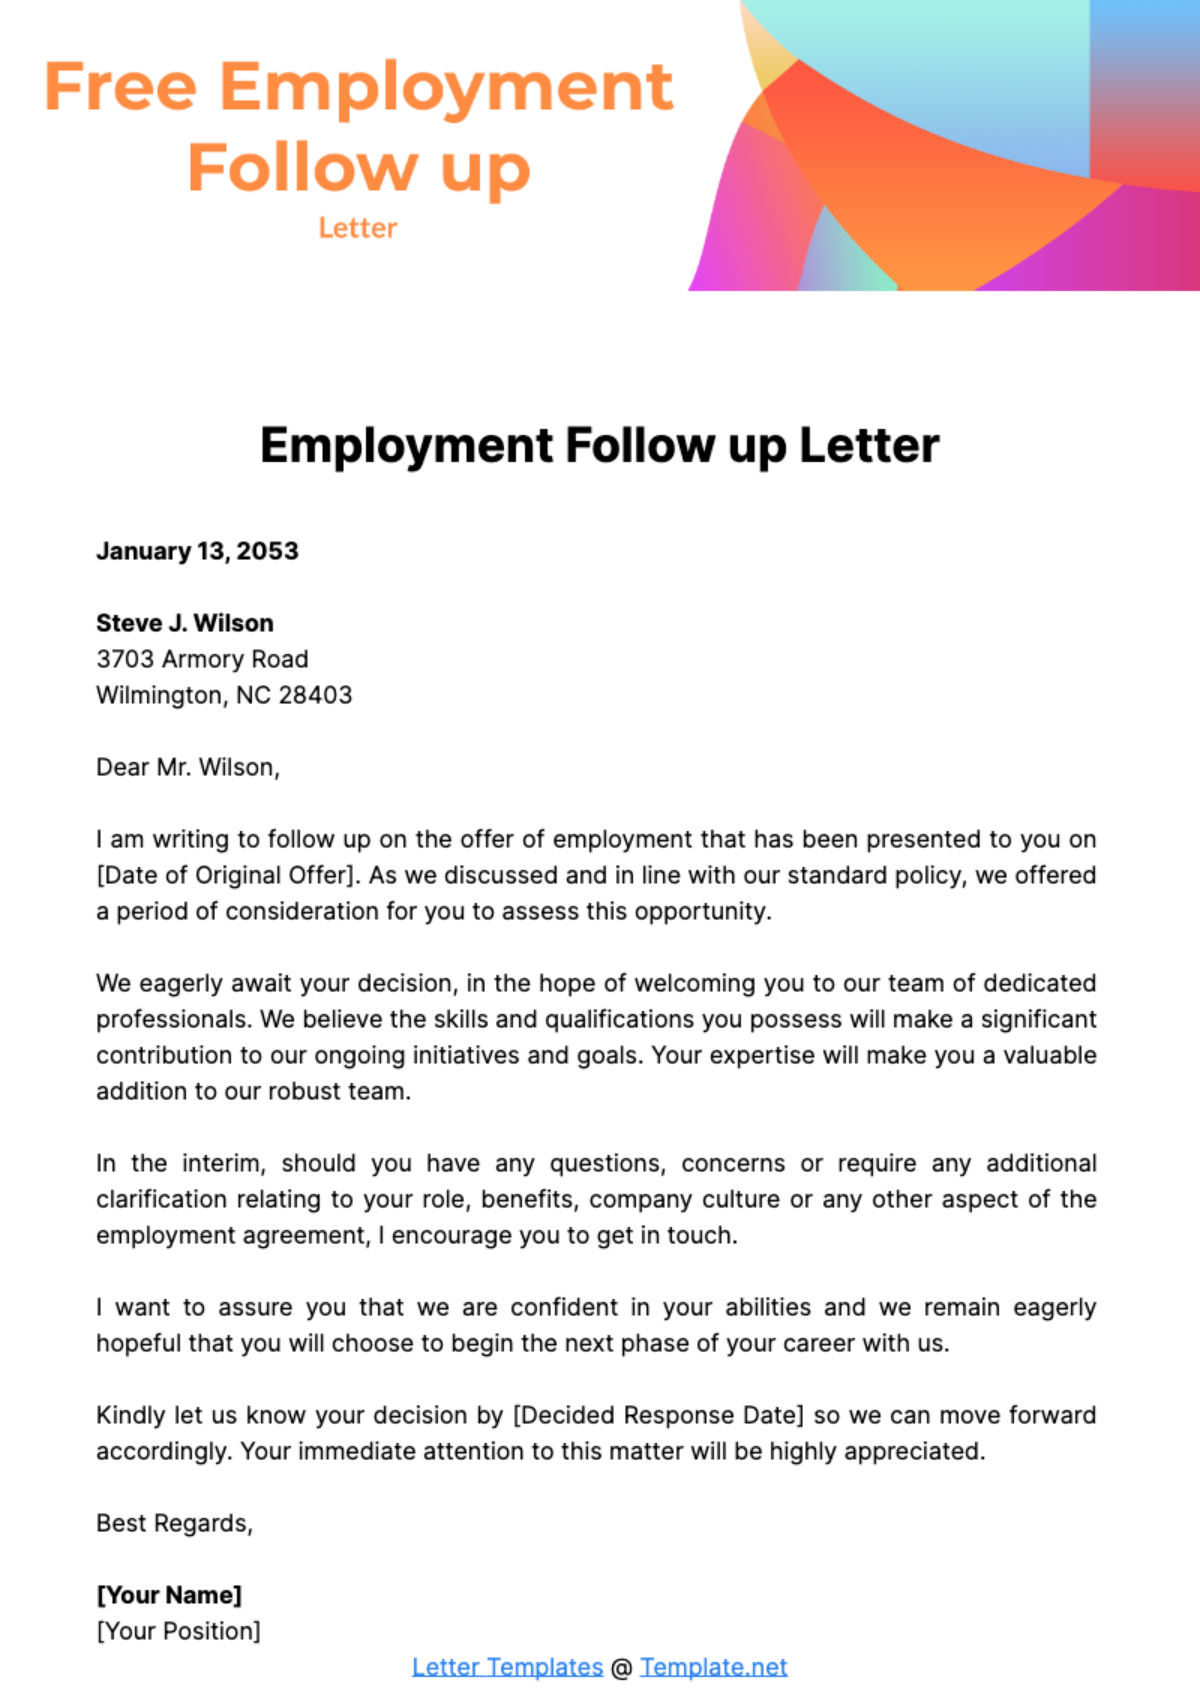 Free Employment Follow up Letter Template